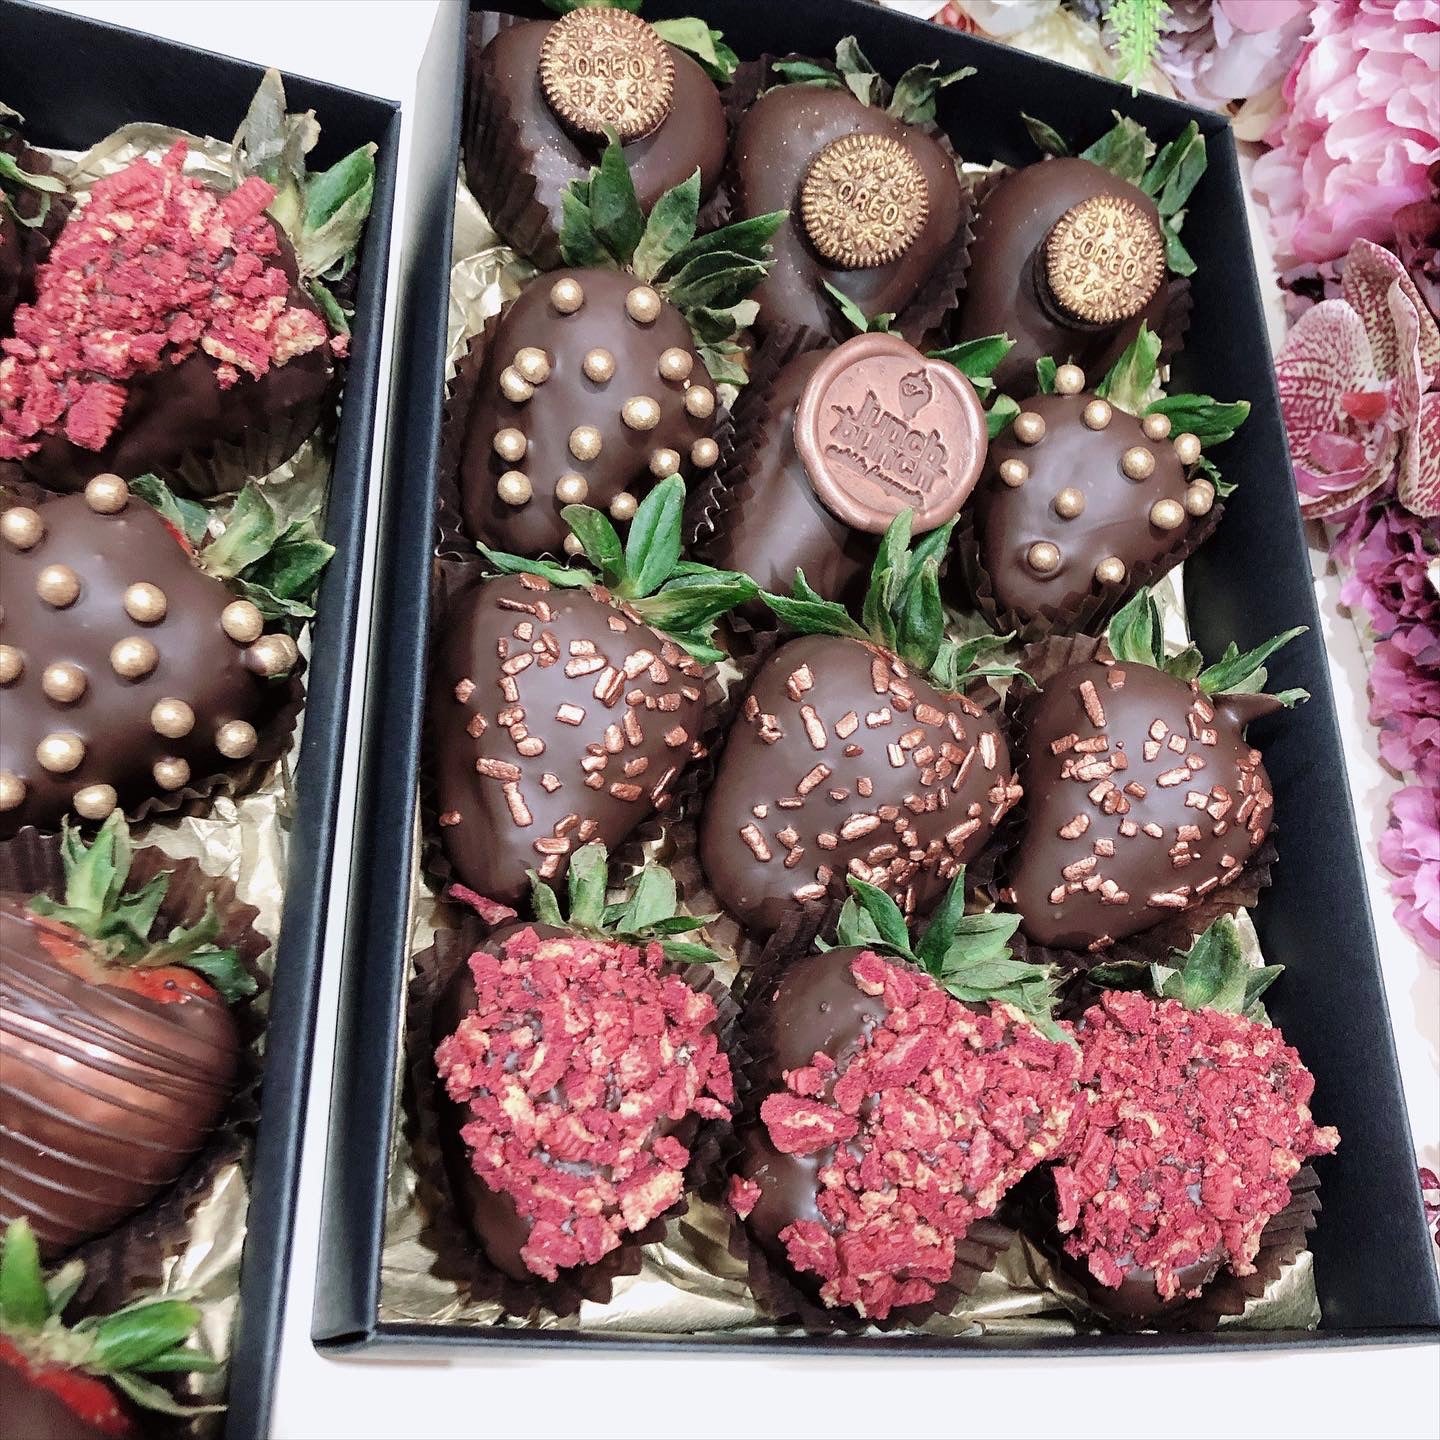 Healthy chocolate covered strawberries gift box dessert hamper for a birthday gift for wedding anniversary thank you gift